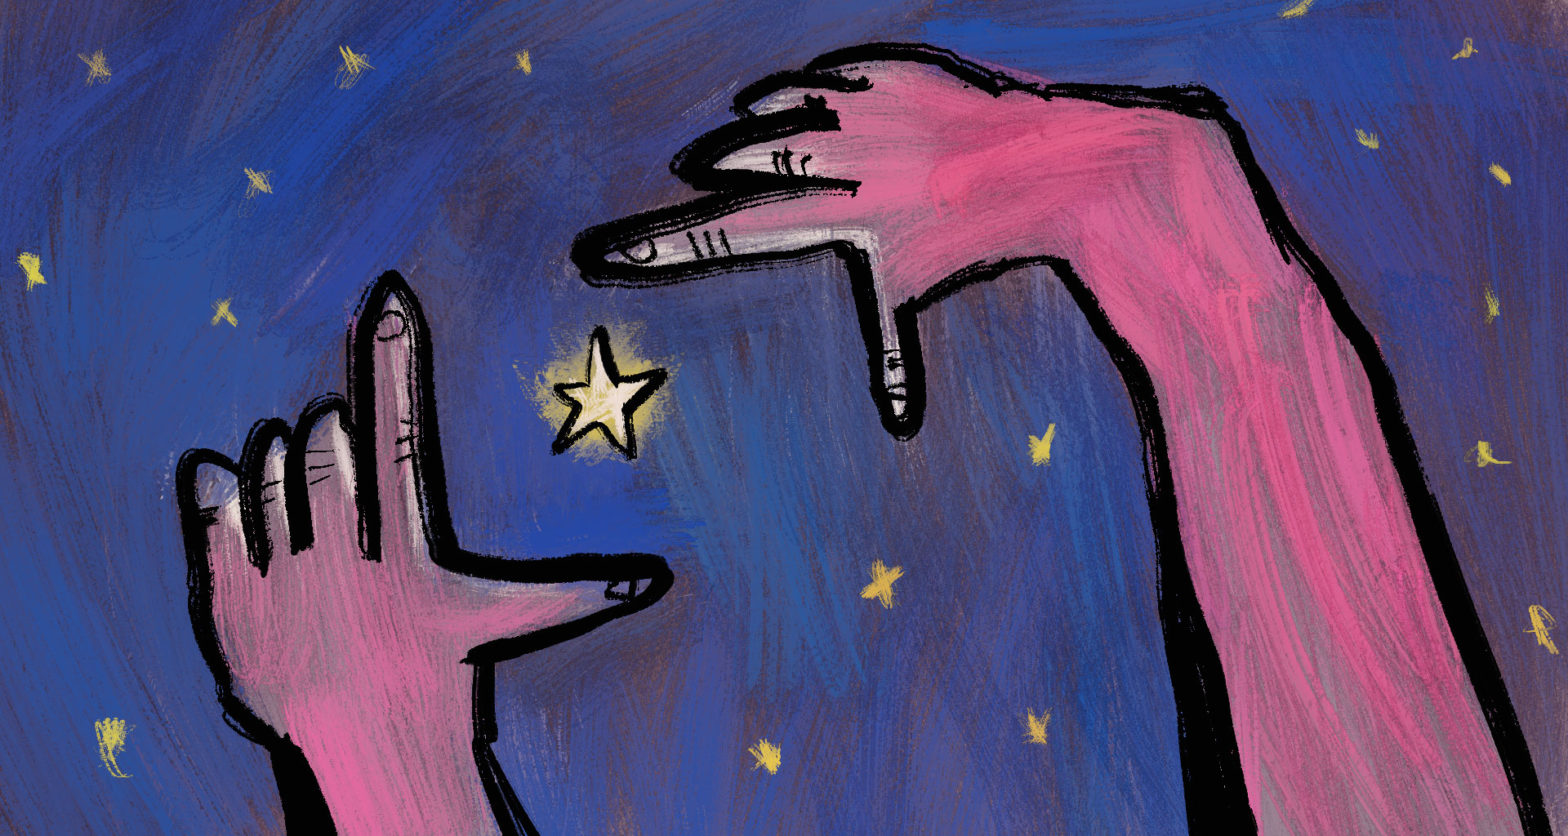 A painting of a pair of hands framing a star in the night sky